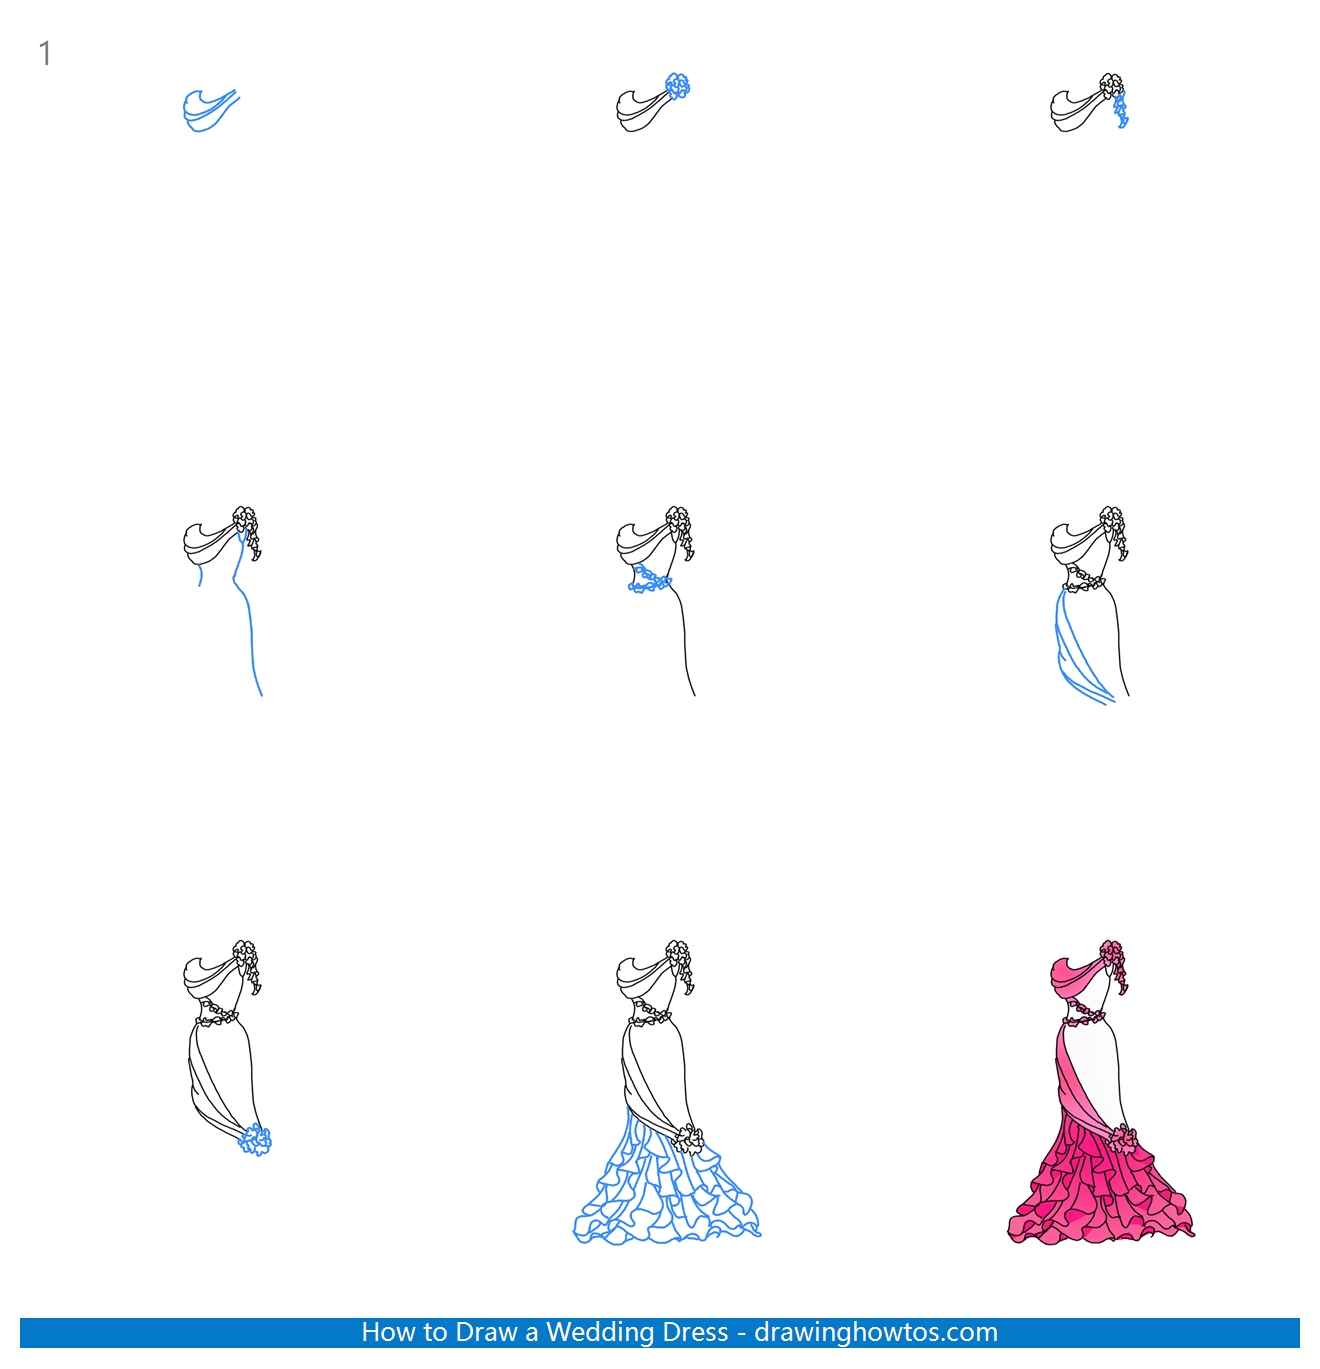 How to Draw a Floral Dress for Wedding Step by Step